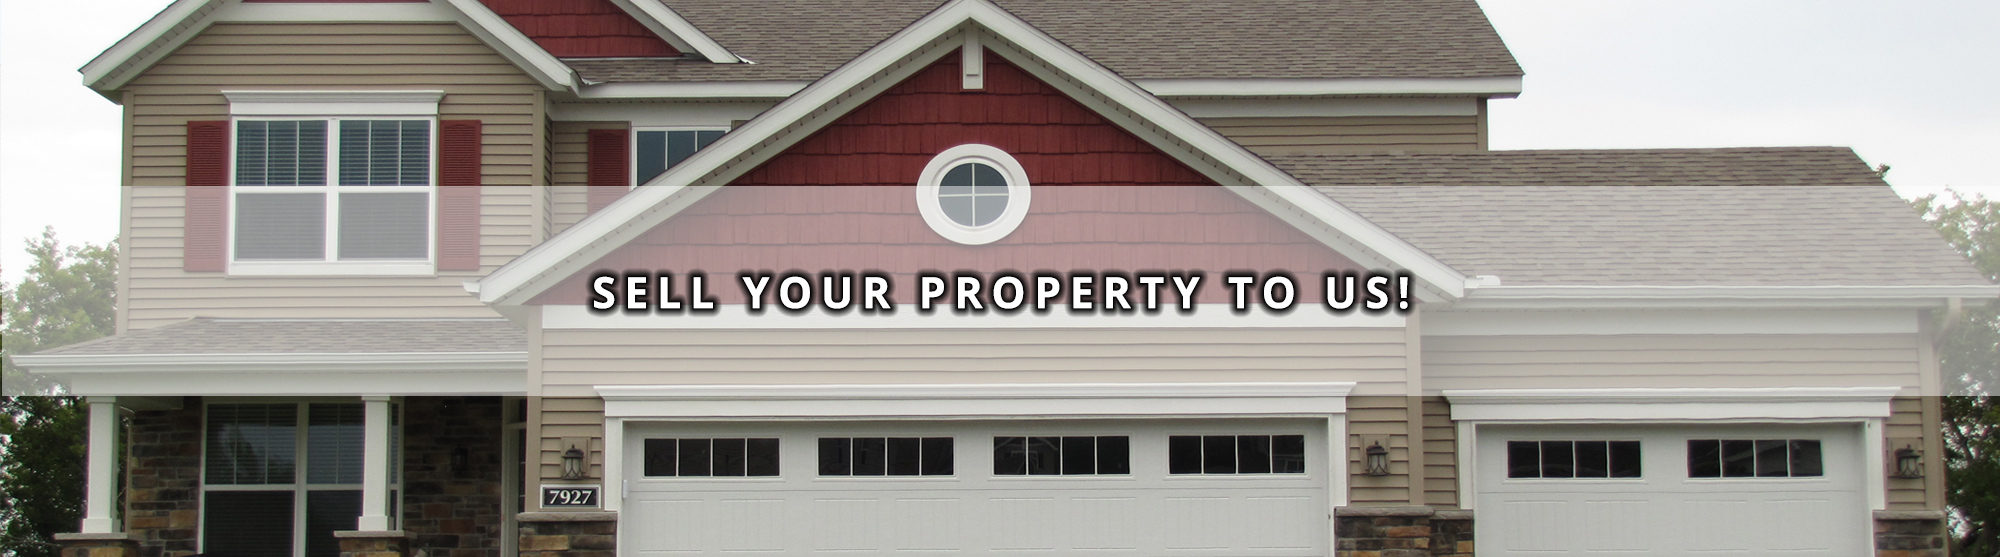 Sell Your Property To Us!